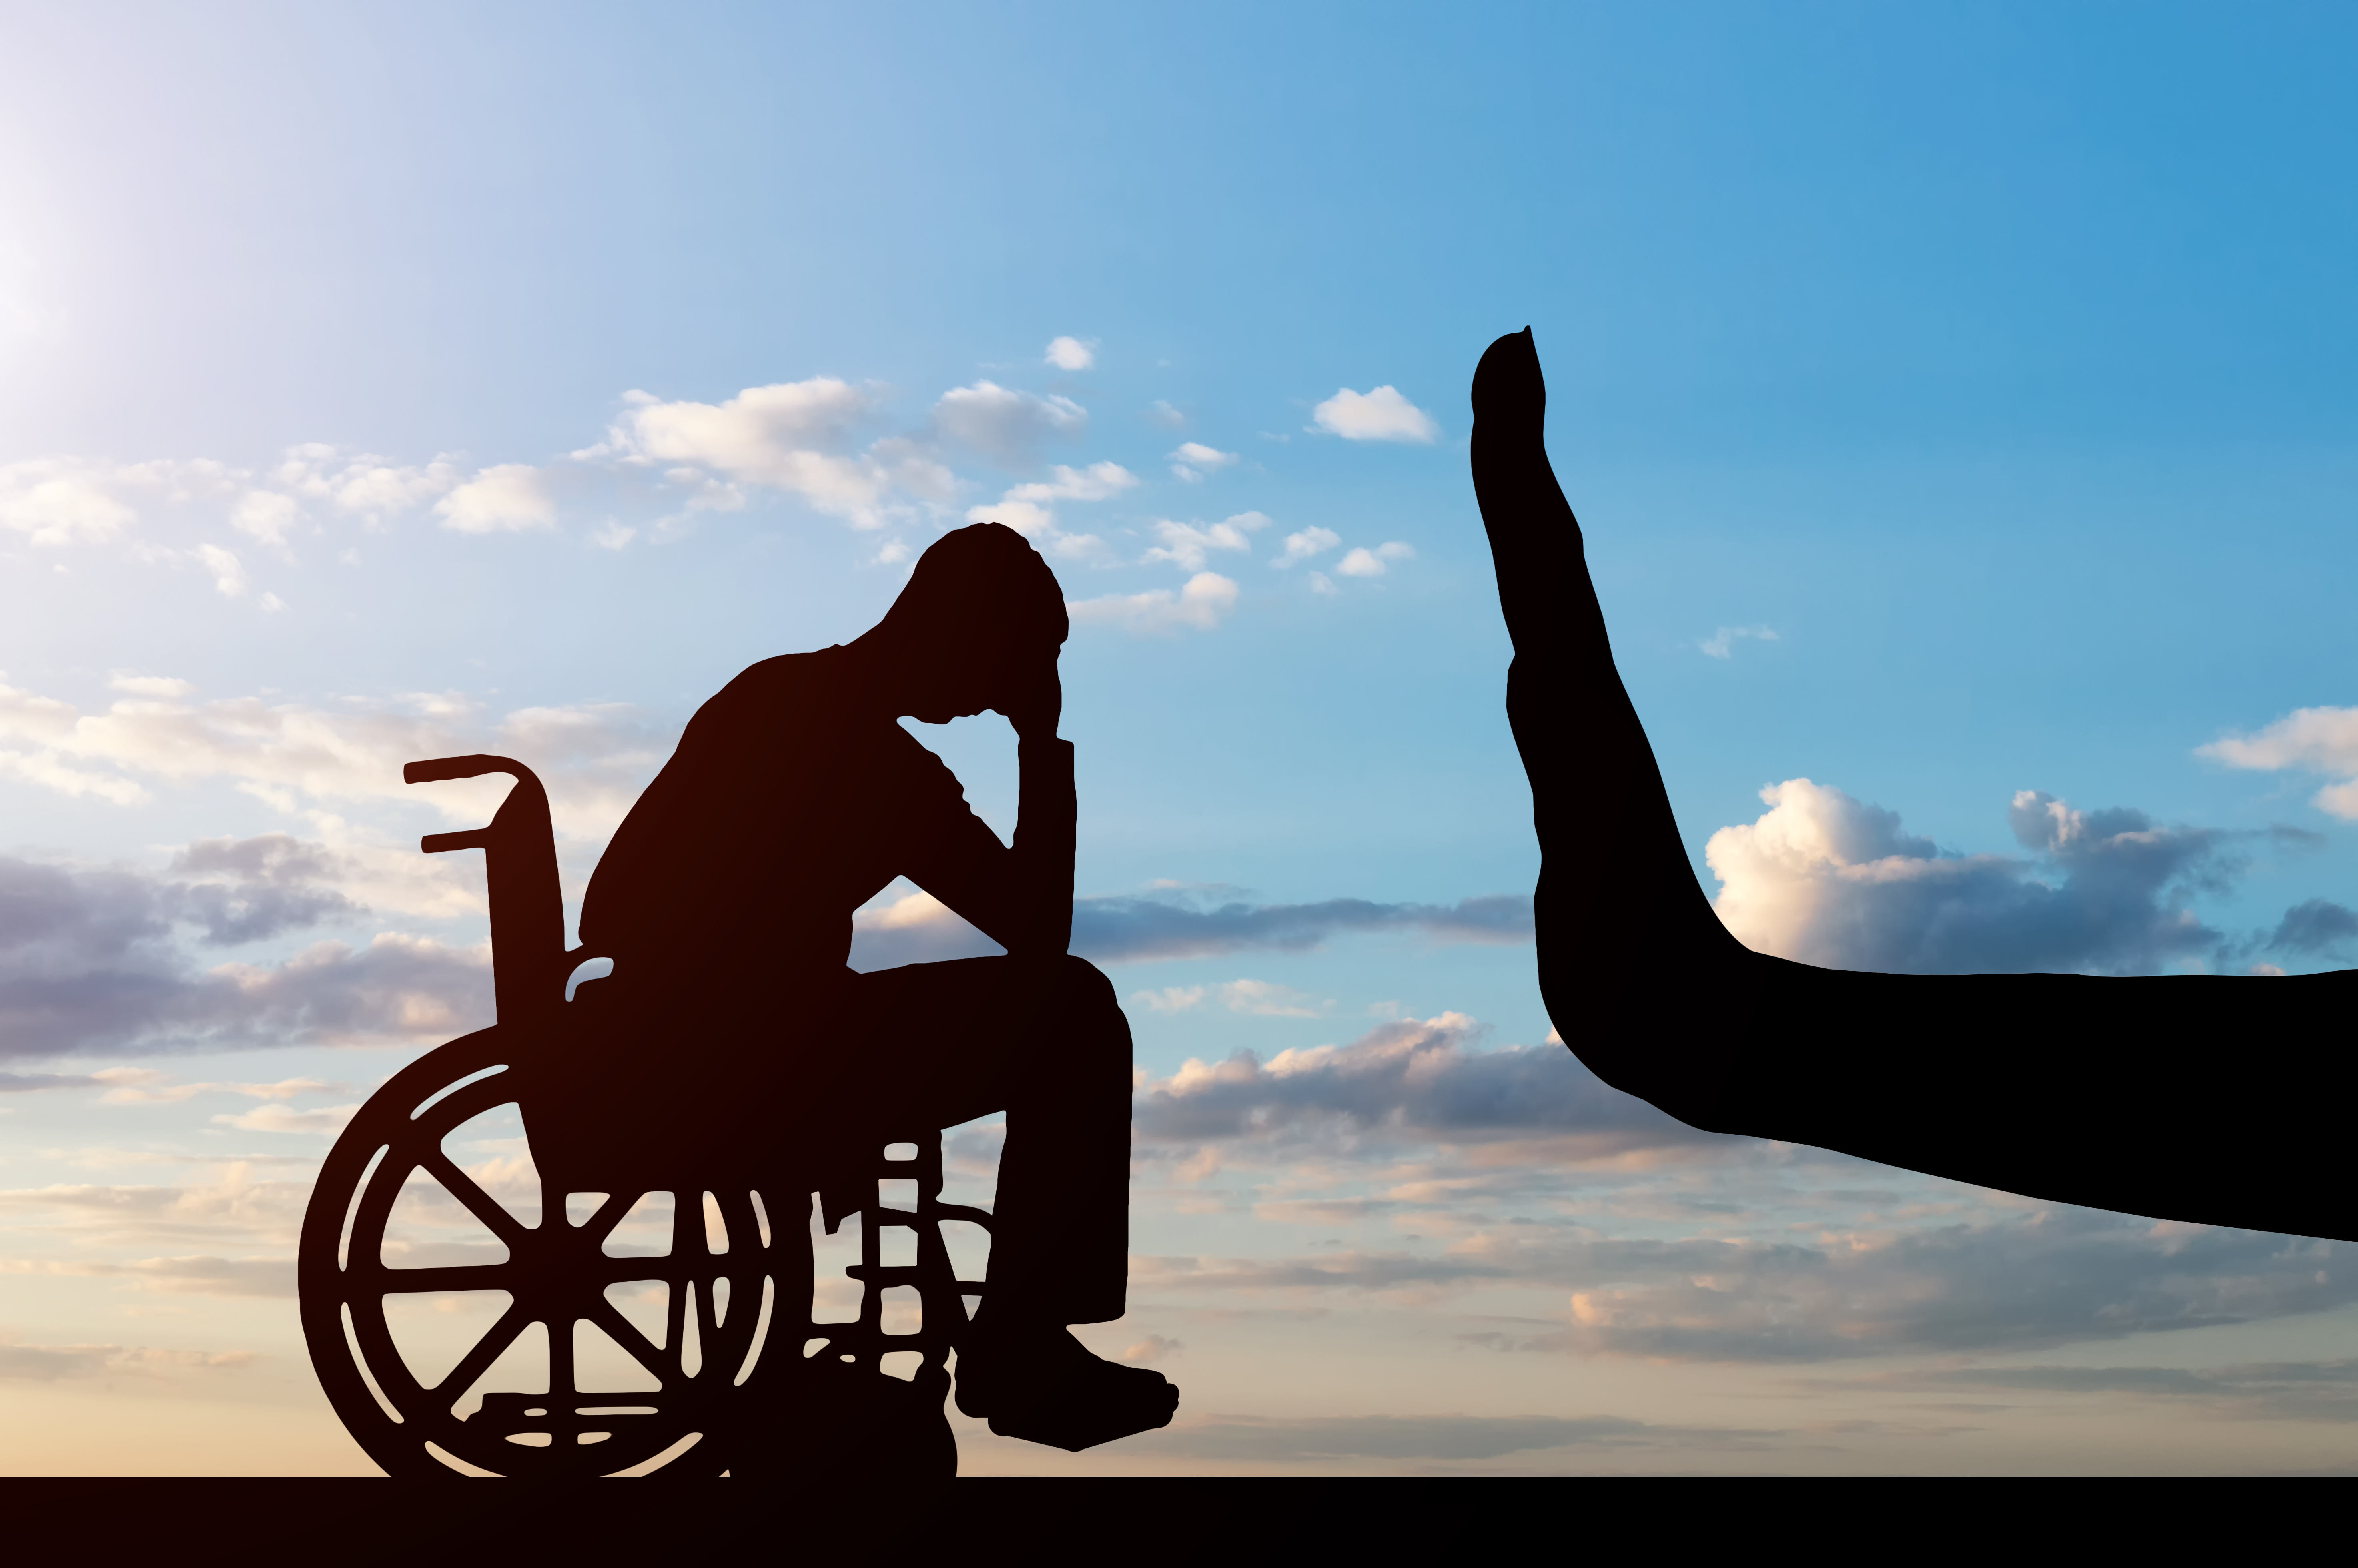 Silhouette of man in wheelchair with a silhouette of a hand held out in front of him